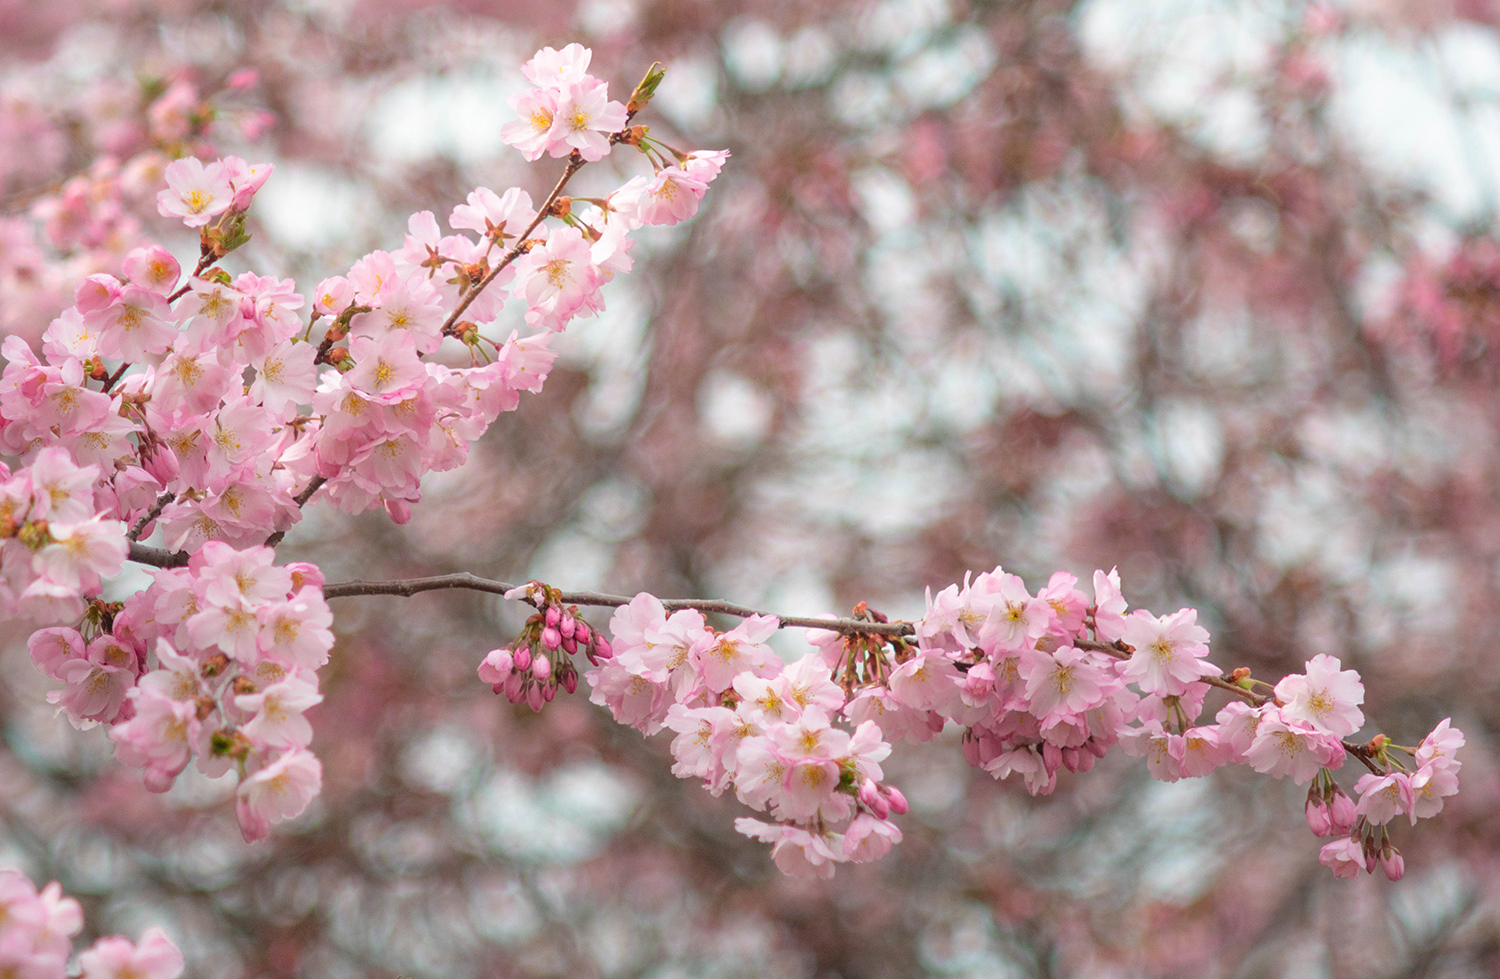 <p>Cherry blossoms in bloom in Berlin. <br /></p>
<p>The swirling background comes from a fantastic old lens, the Asahi SMC Takumar 135/f3.5. </p>